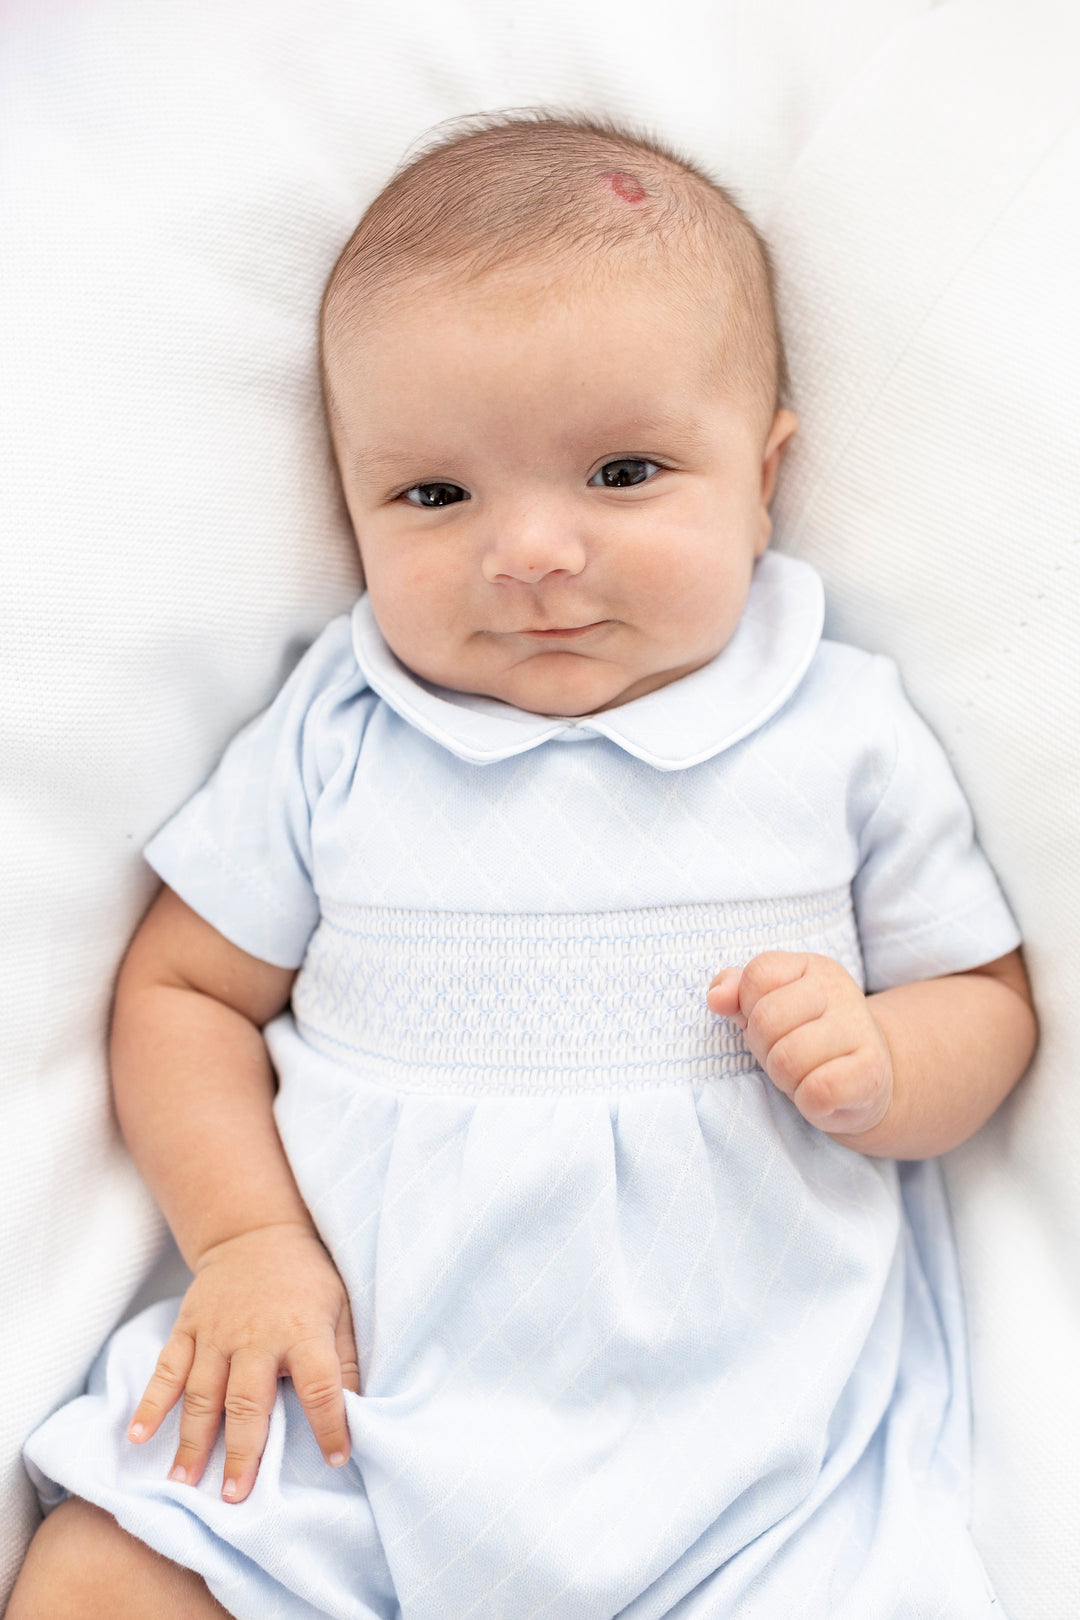 Blues Baby PREORDER "Luca" Blue Smocked Romper | Millie and John